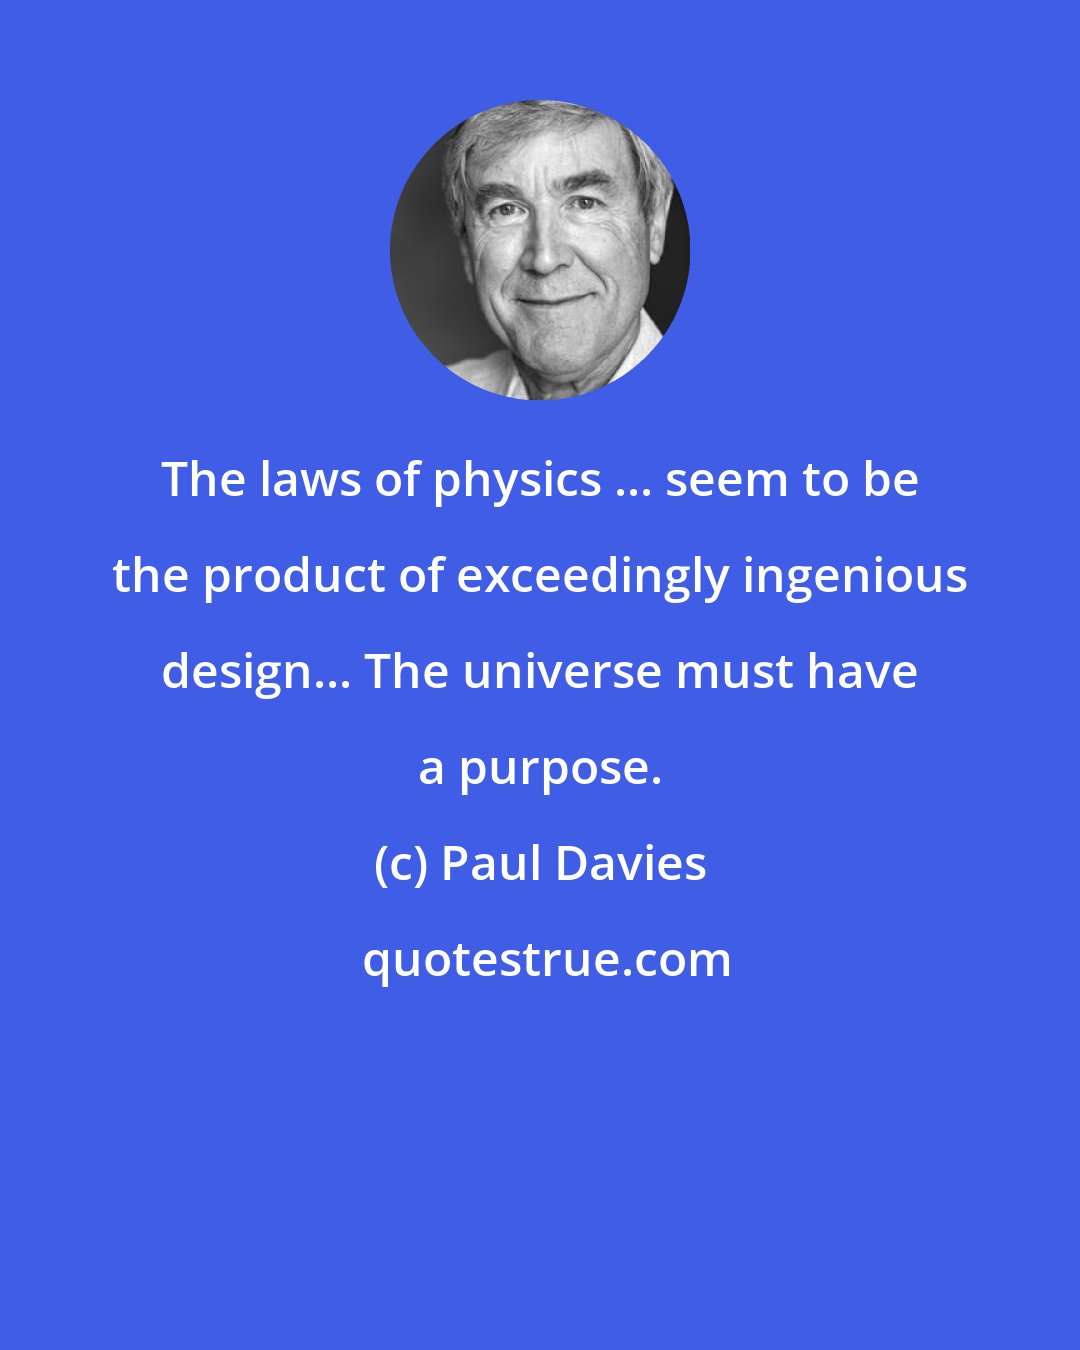 Paul Davies: The laws of physics ... seem to be the product of exceedingly ingenious design... The universe must have a purpose.